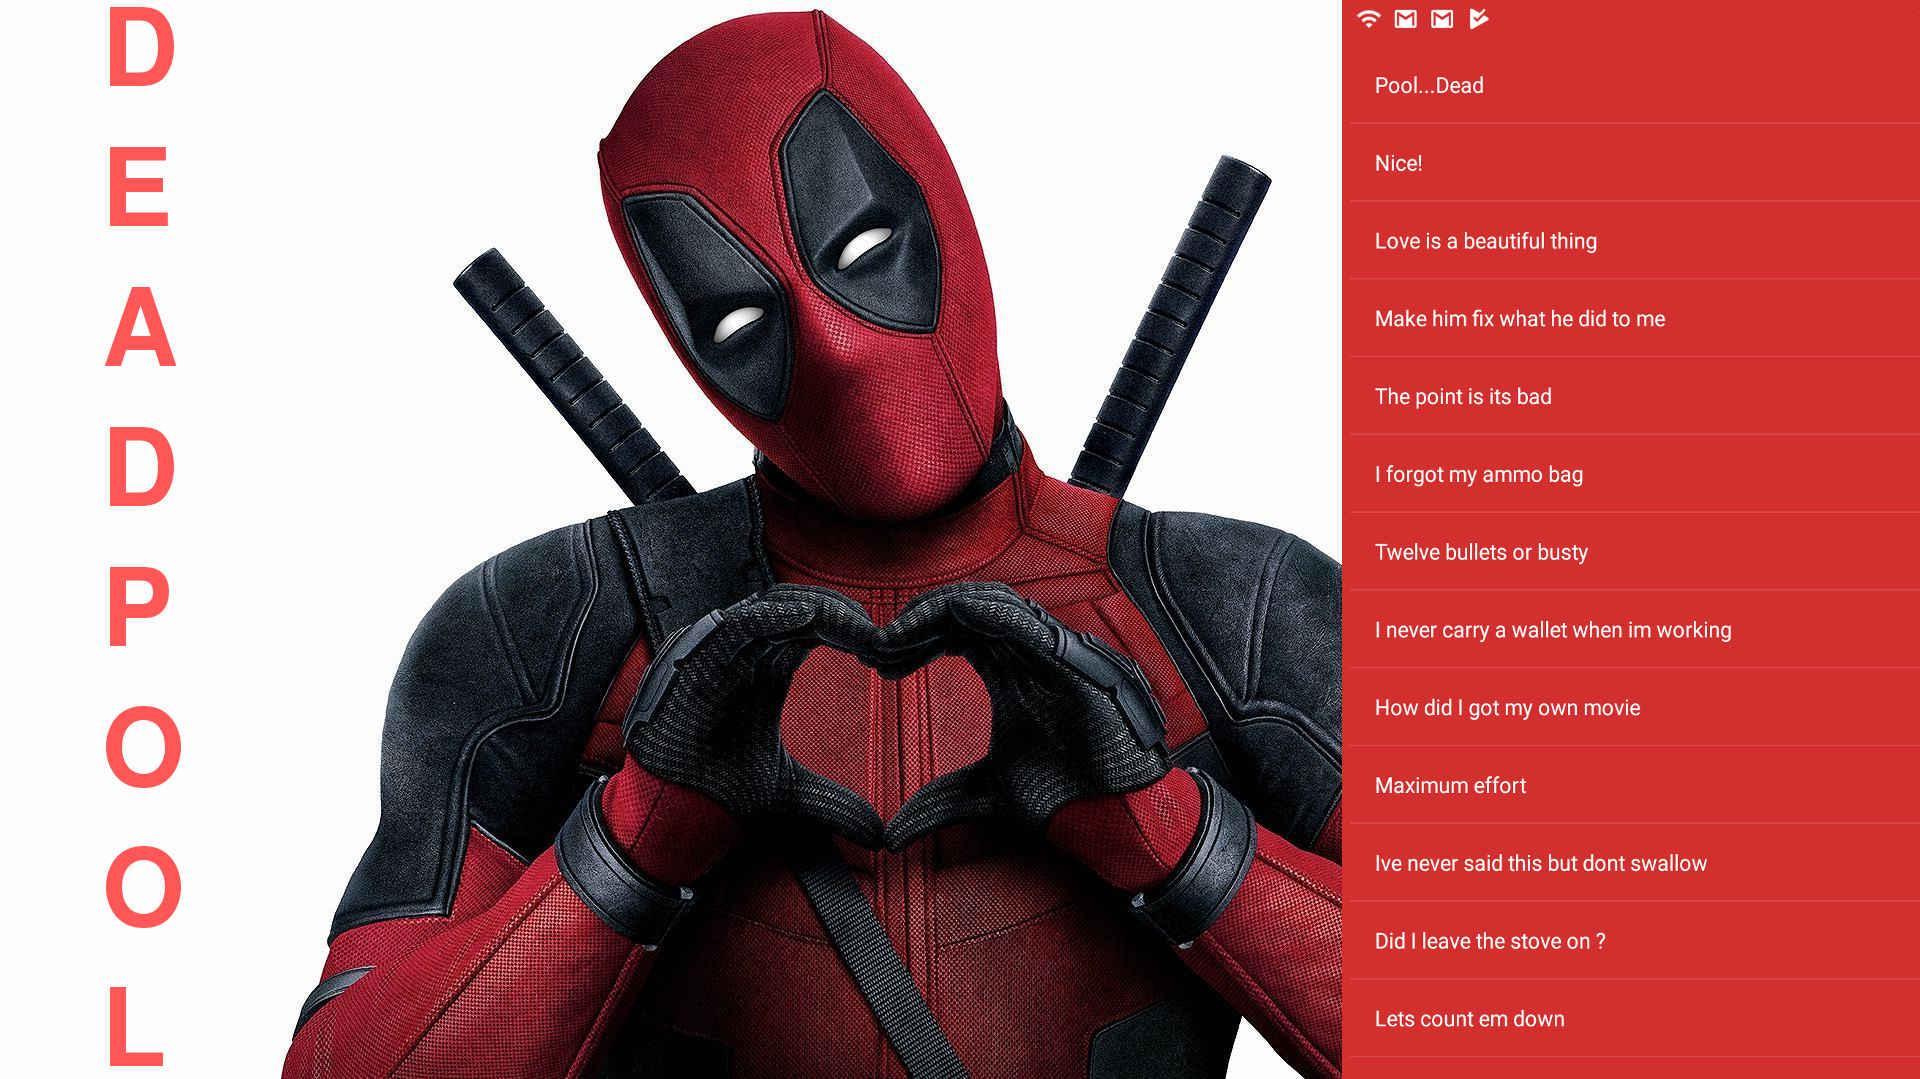 Deadpool Soundboard For Android Apk Download - deadpool icon png 12 roblox